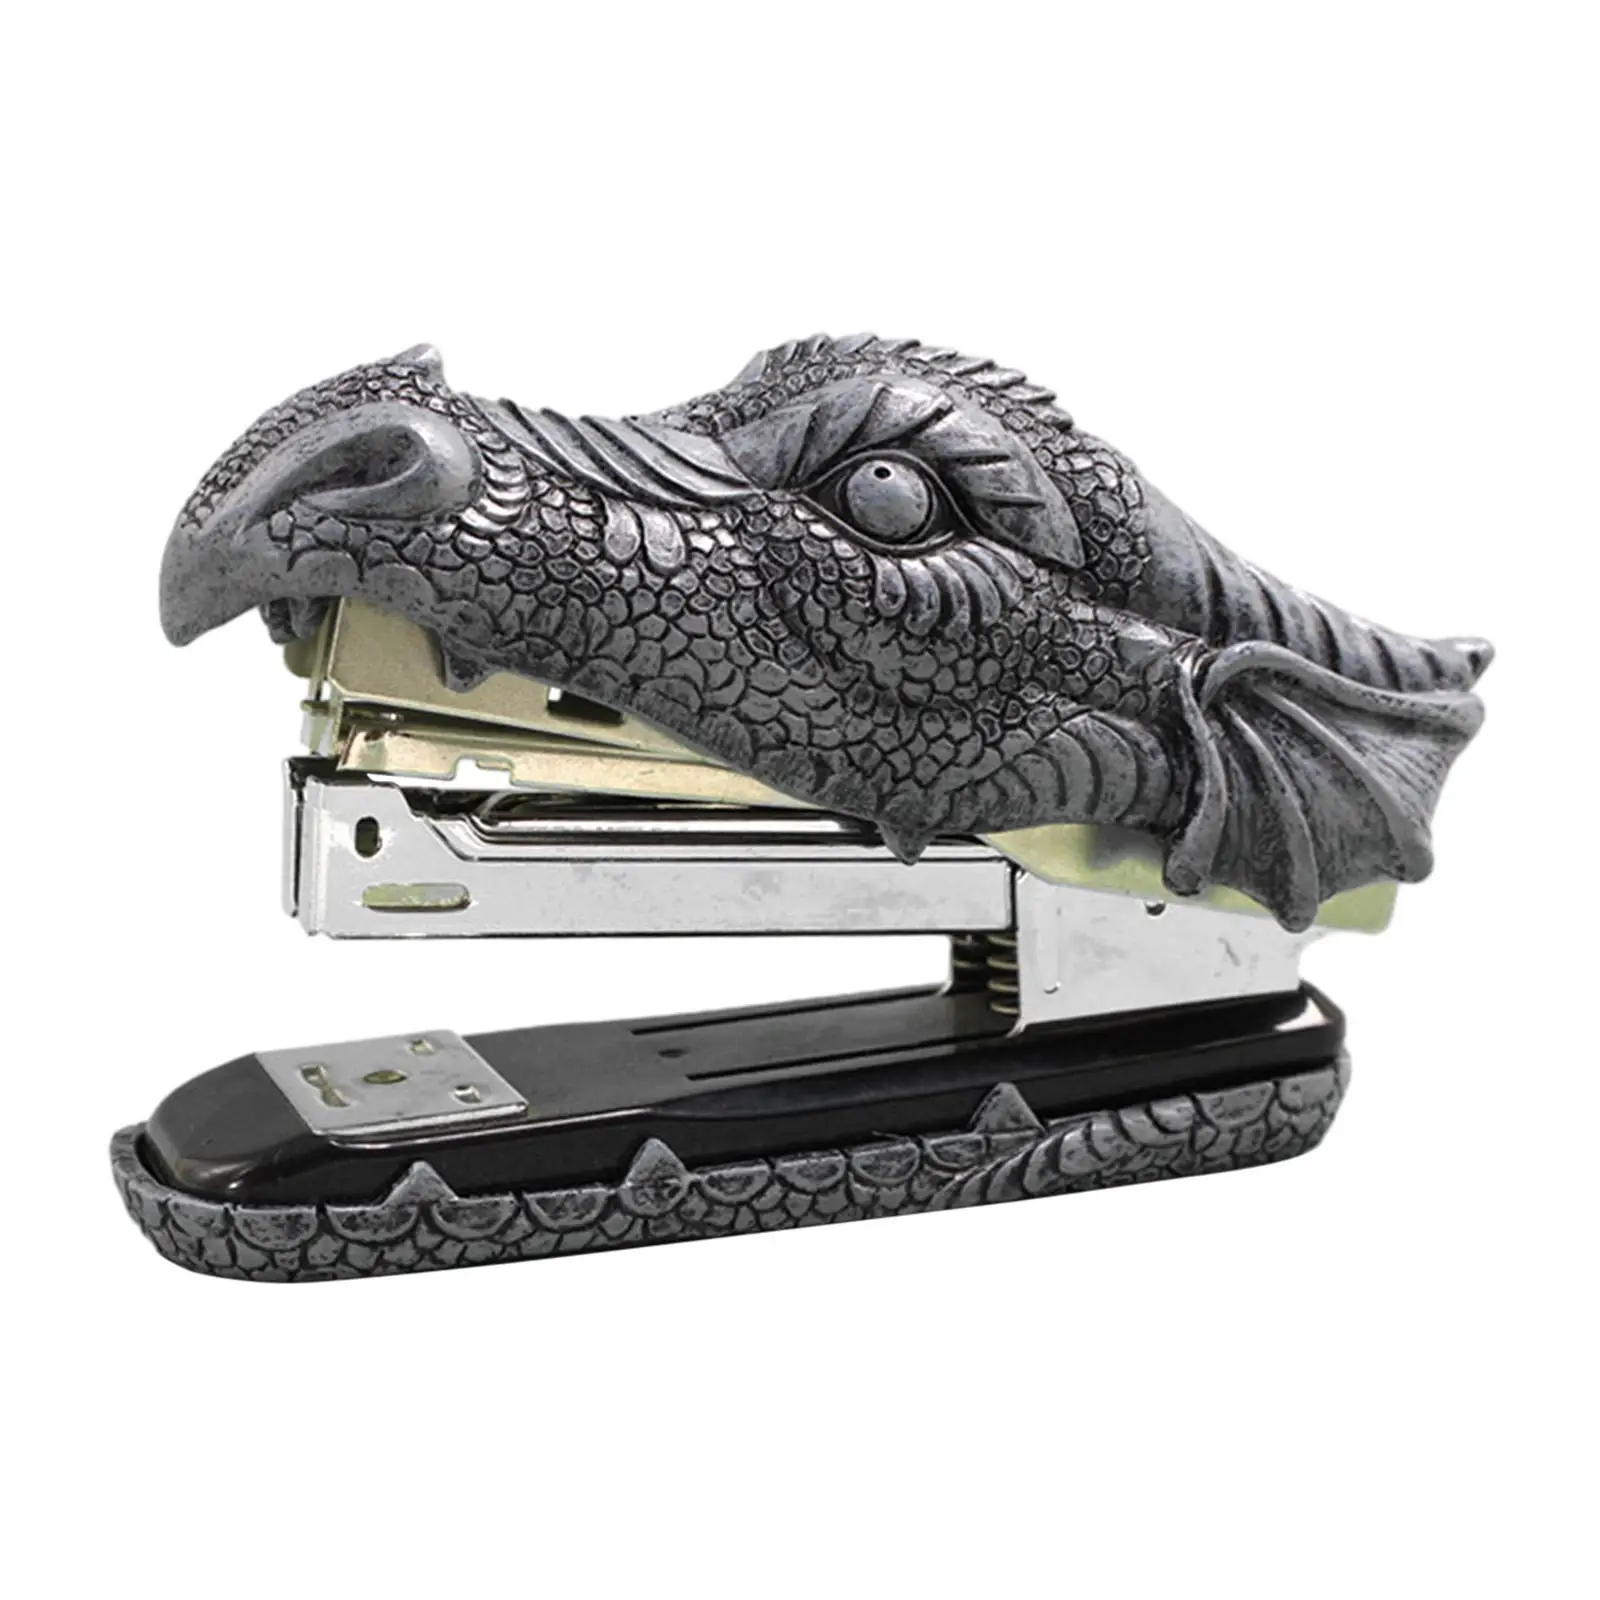 Dragon Head Stapler Office Desktop Accessory Home Decor Resin Stationery Collectible